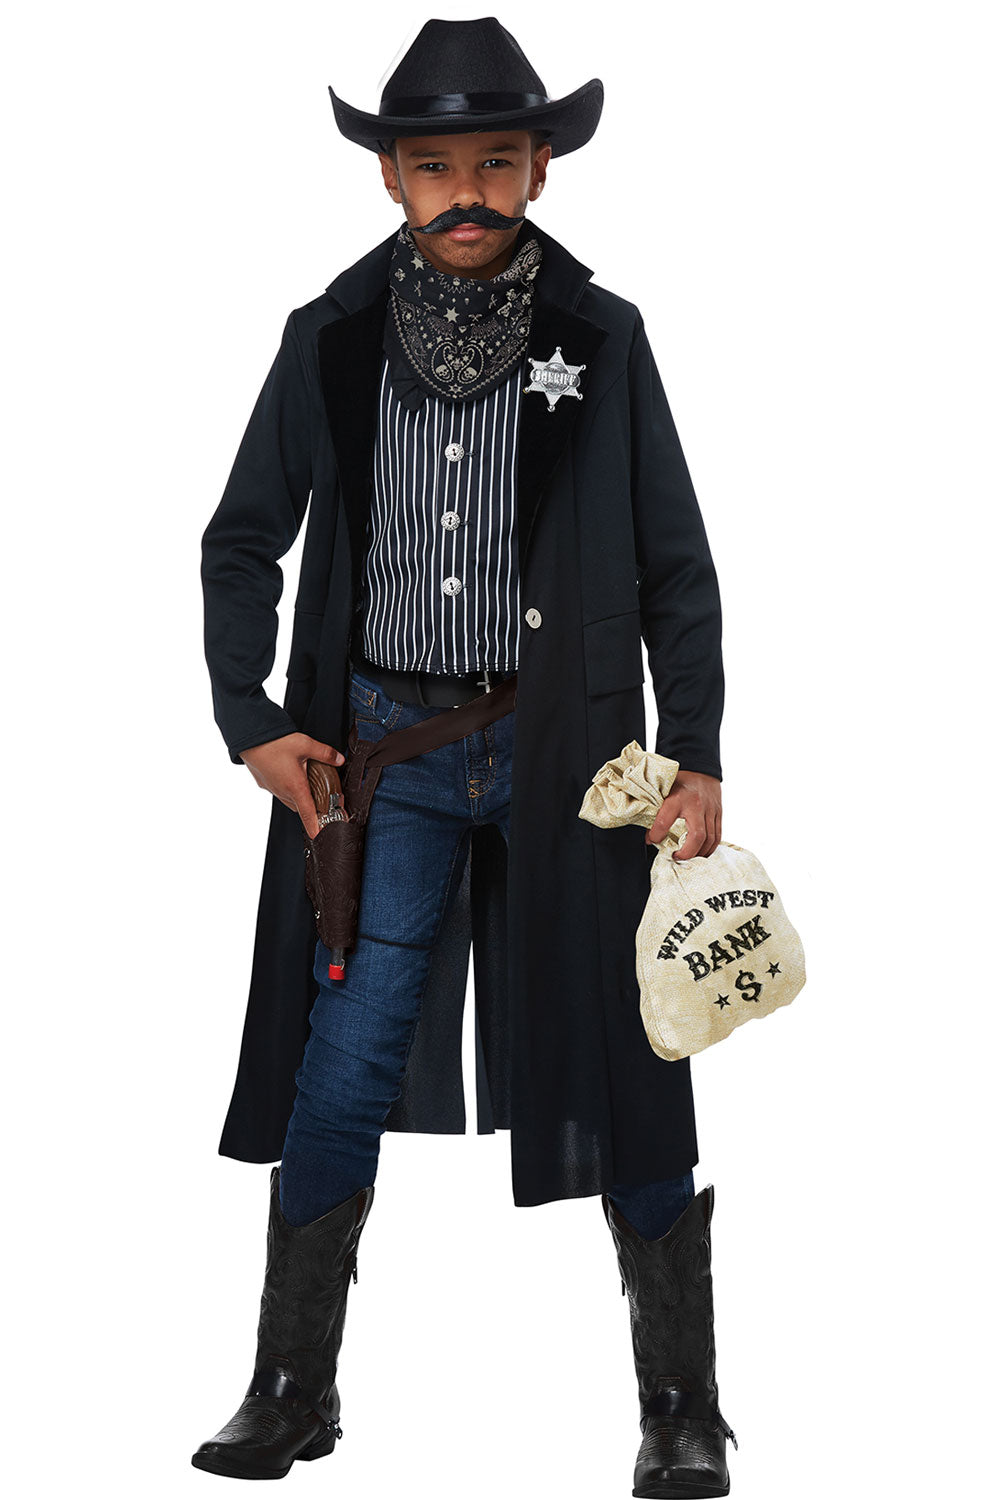 WILD WEST SHERIFF/OUTLAW / CHILD California Costume 00605